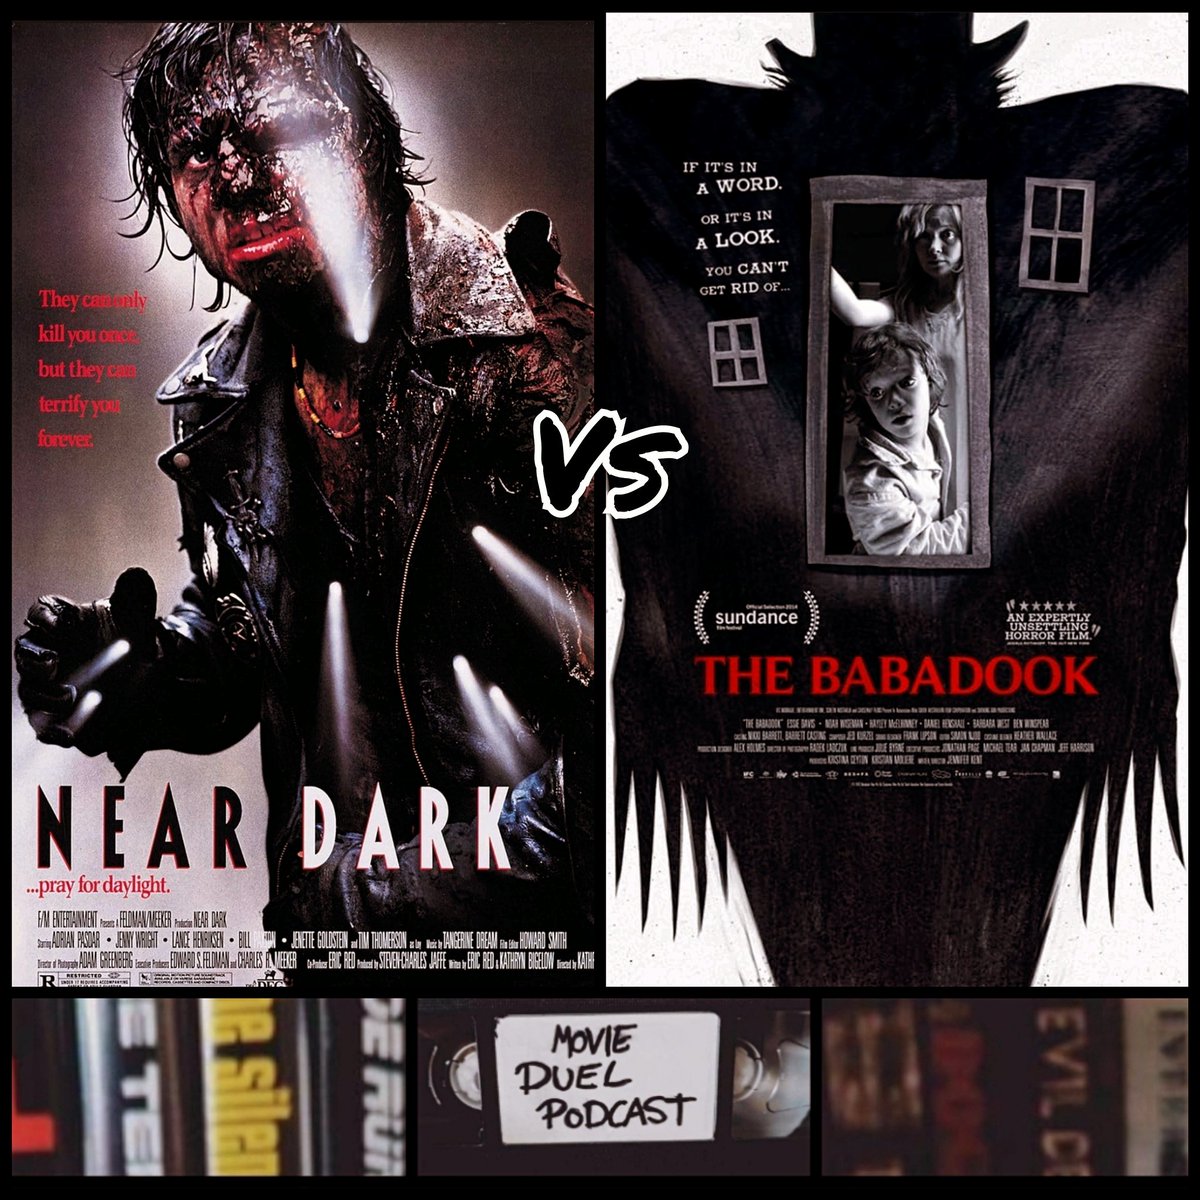 NEW EPISODE 

Welcome to Episode 23 in which myself and Movie Duellist, Tarquin Mandrake, discuss our selections for Episode 23 - Best Female Directed Horror, Near Dark (1987) and The Babadook (2014).
#movieduelpod #neardark #thebabadook #fingerlickingood #whycantyoujustbenormal